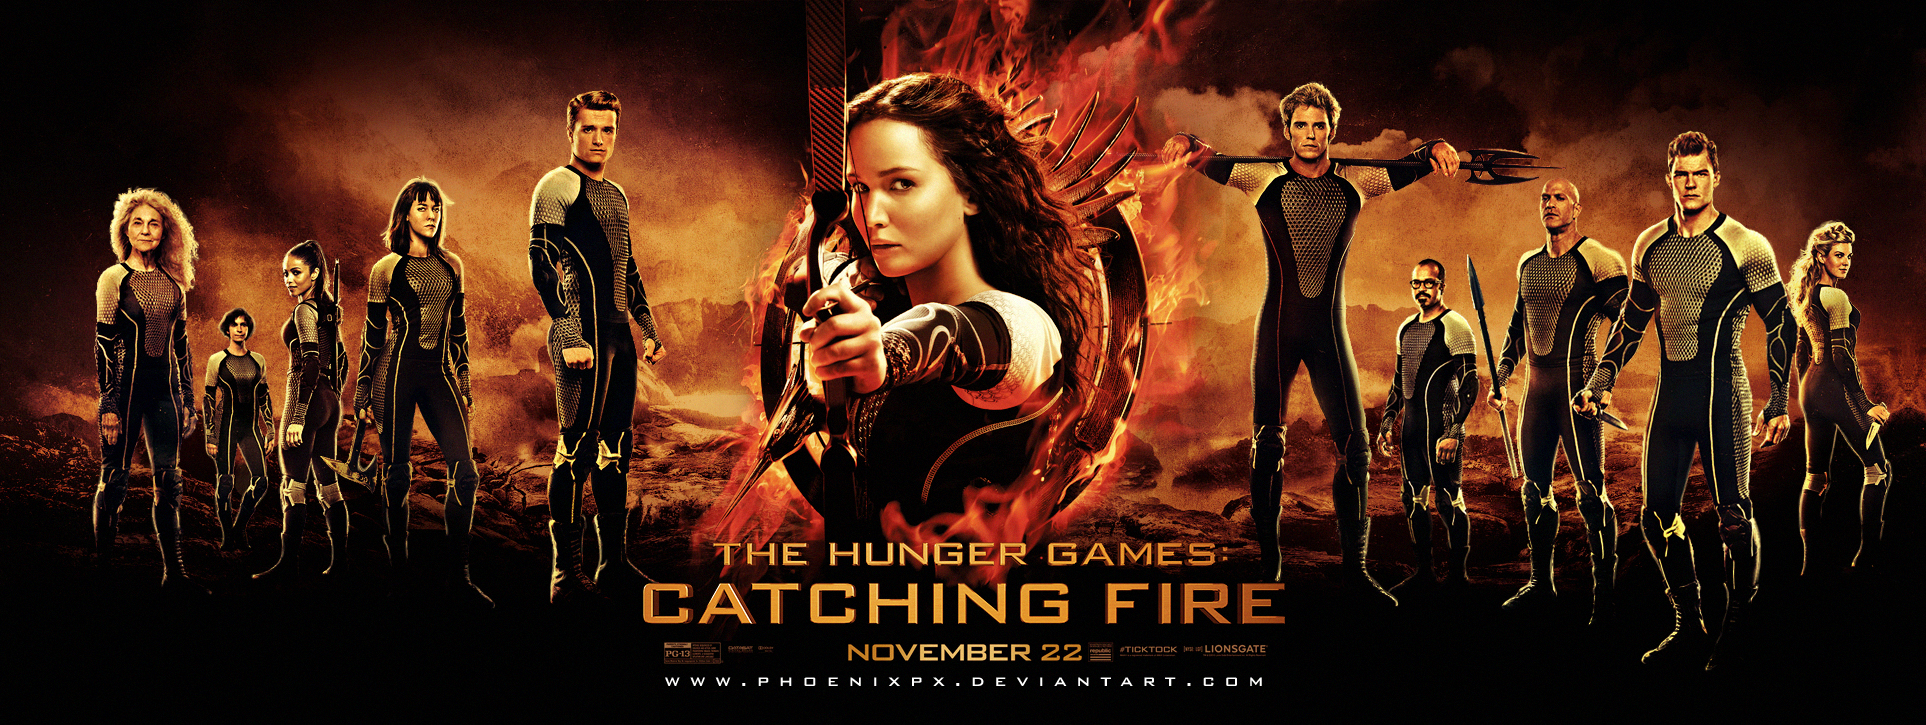 New trailer for 'The Hunger Games: Catching Fire' - watch